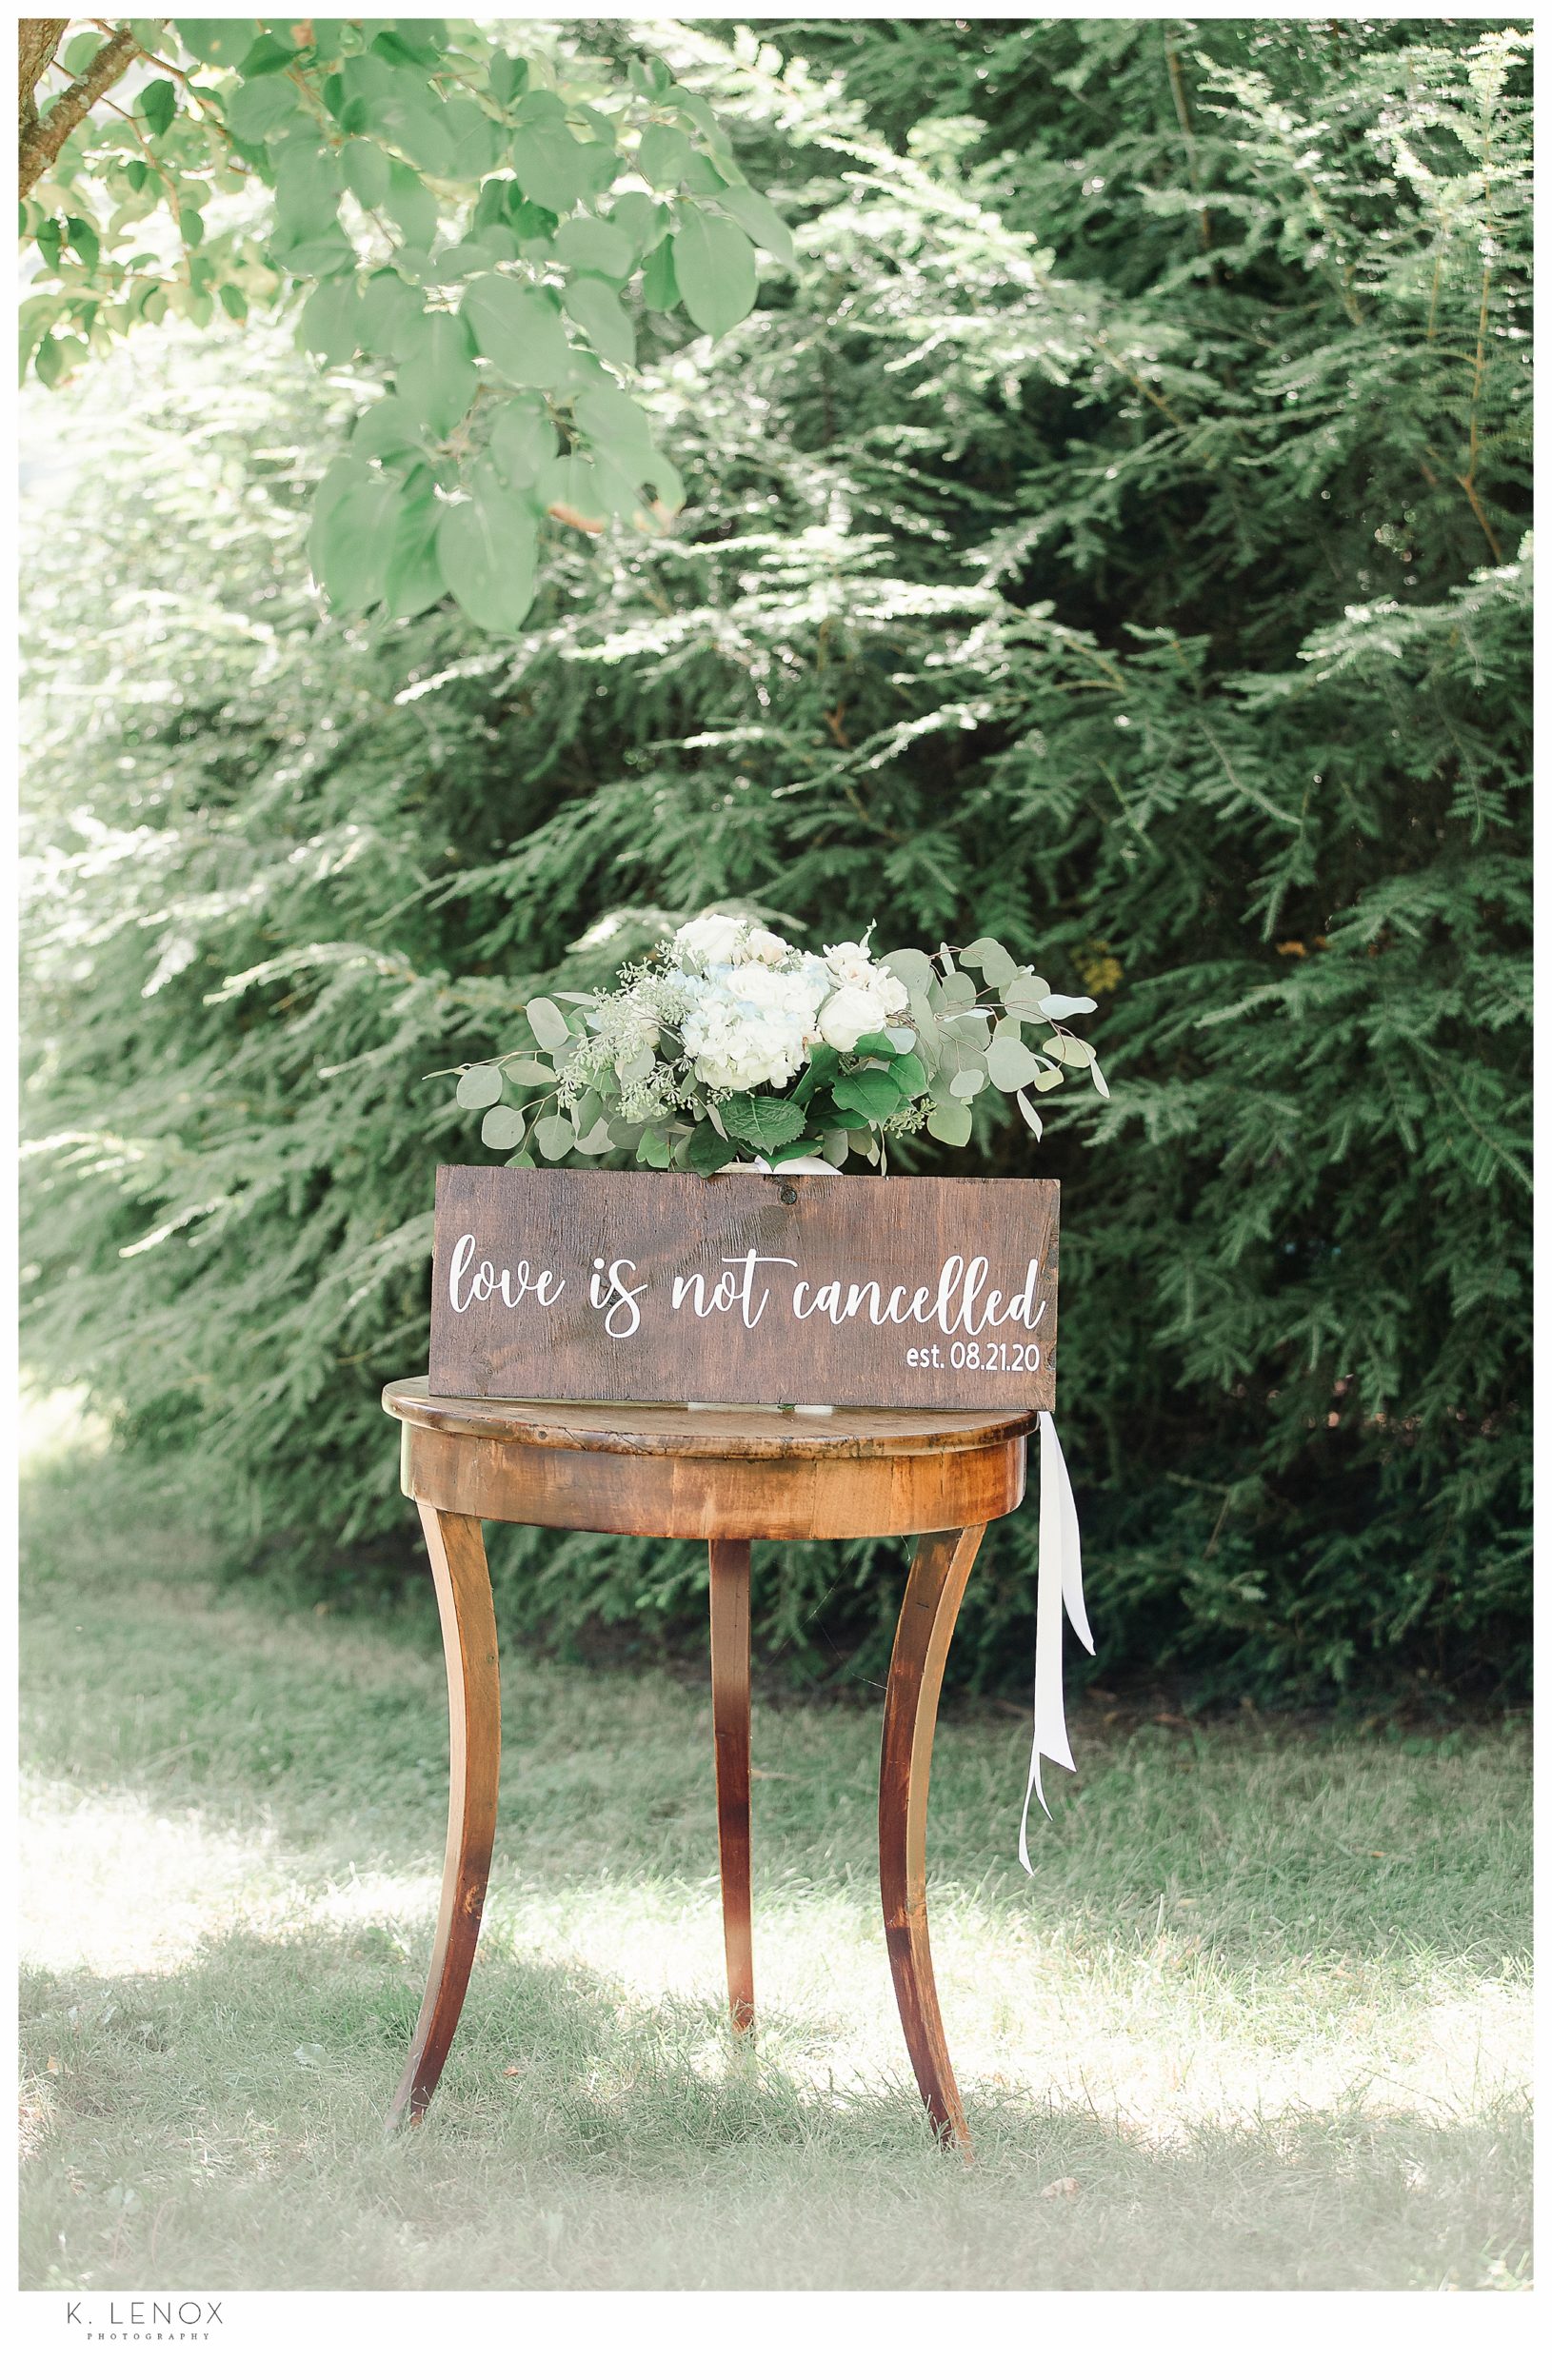 Light and Airy Micro Wedding at Moran Estates- Wooden Sign saying "Love is not cancelled"